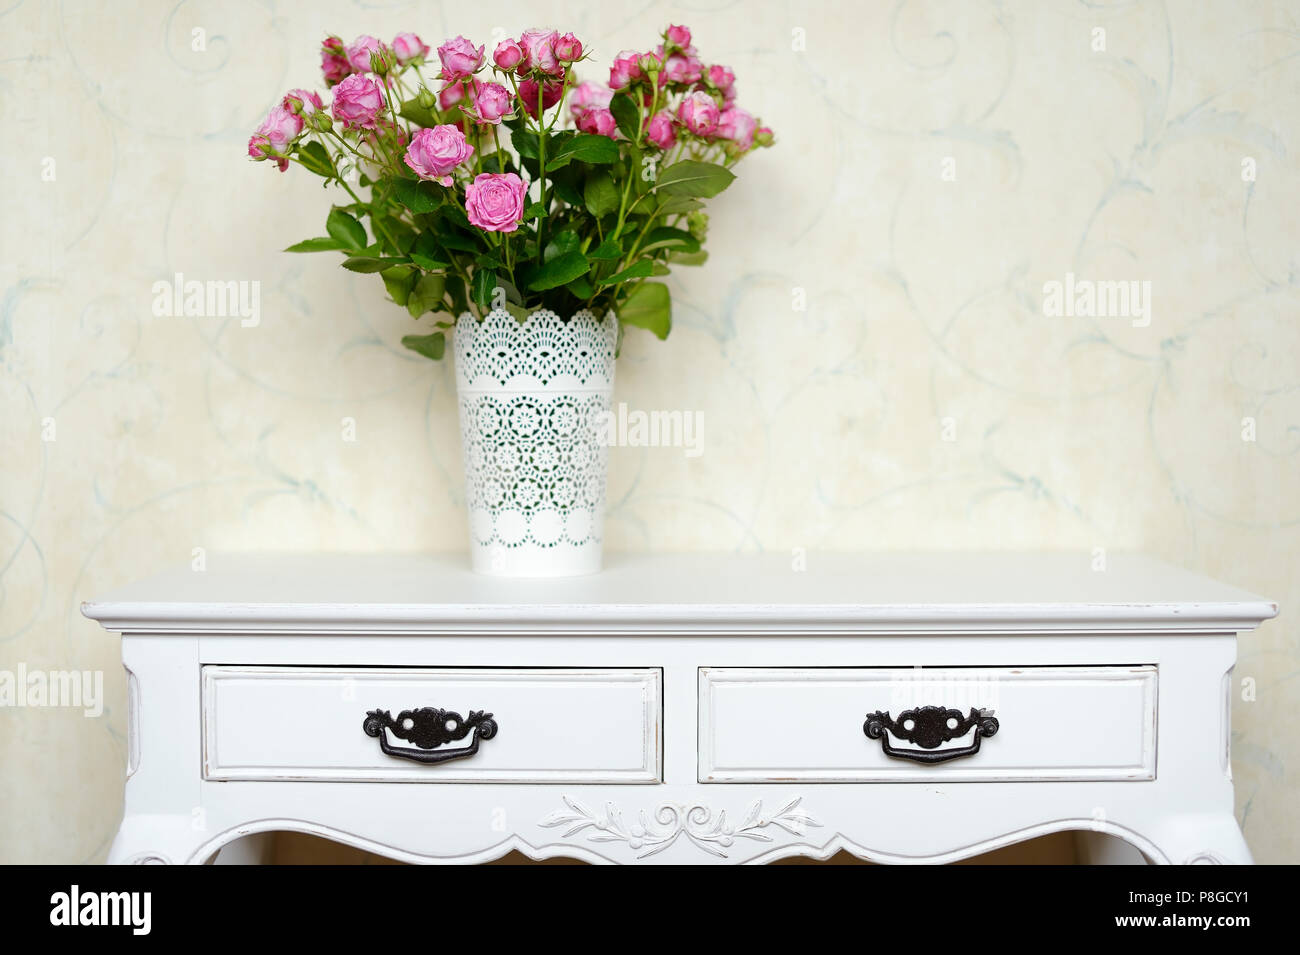 White vase full of pink roses on a counter Stock Photo